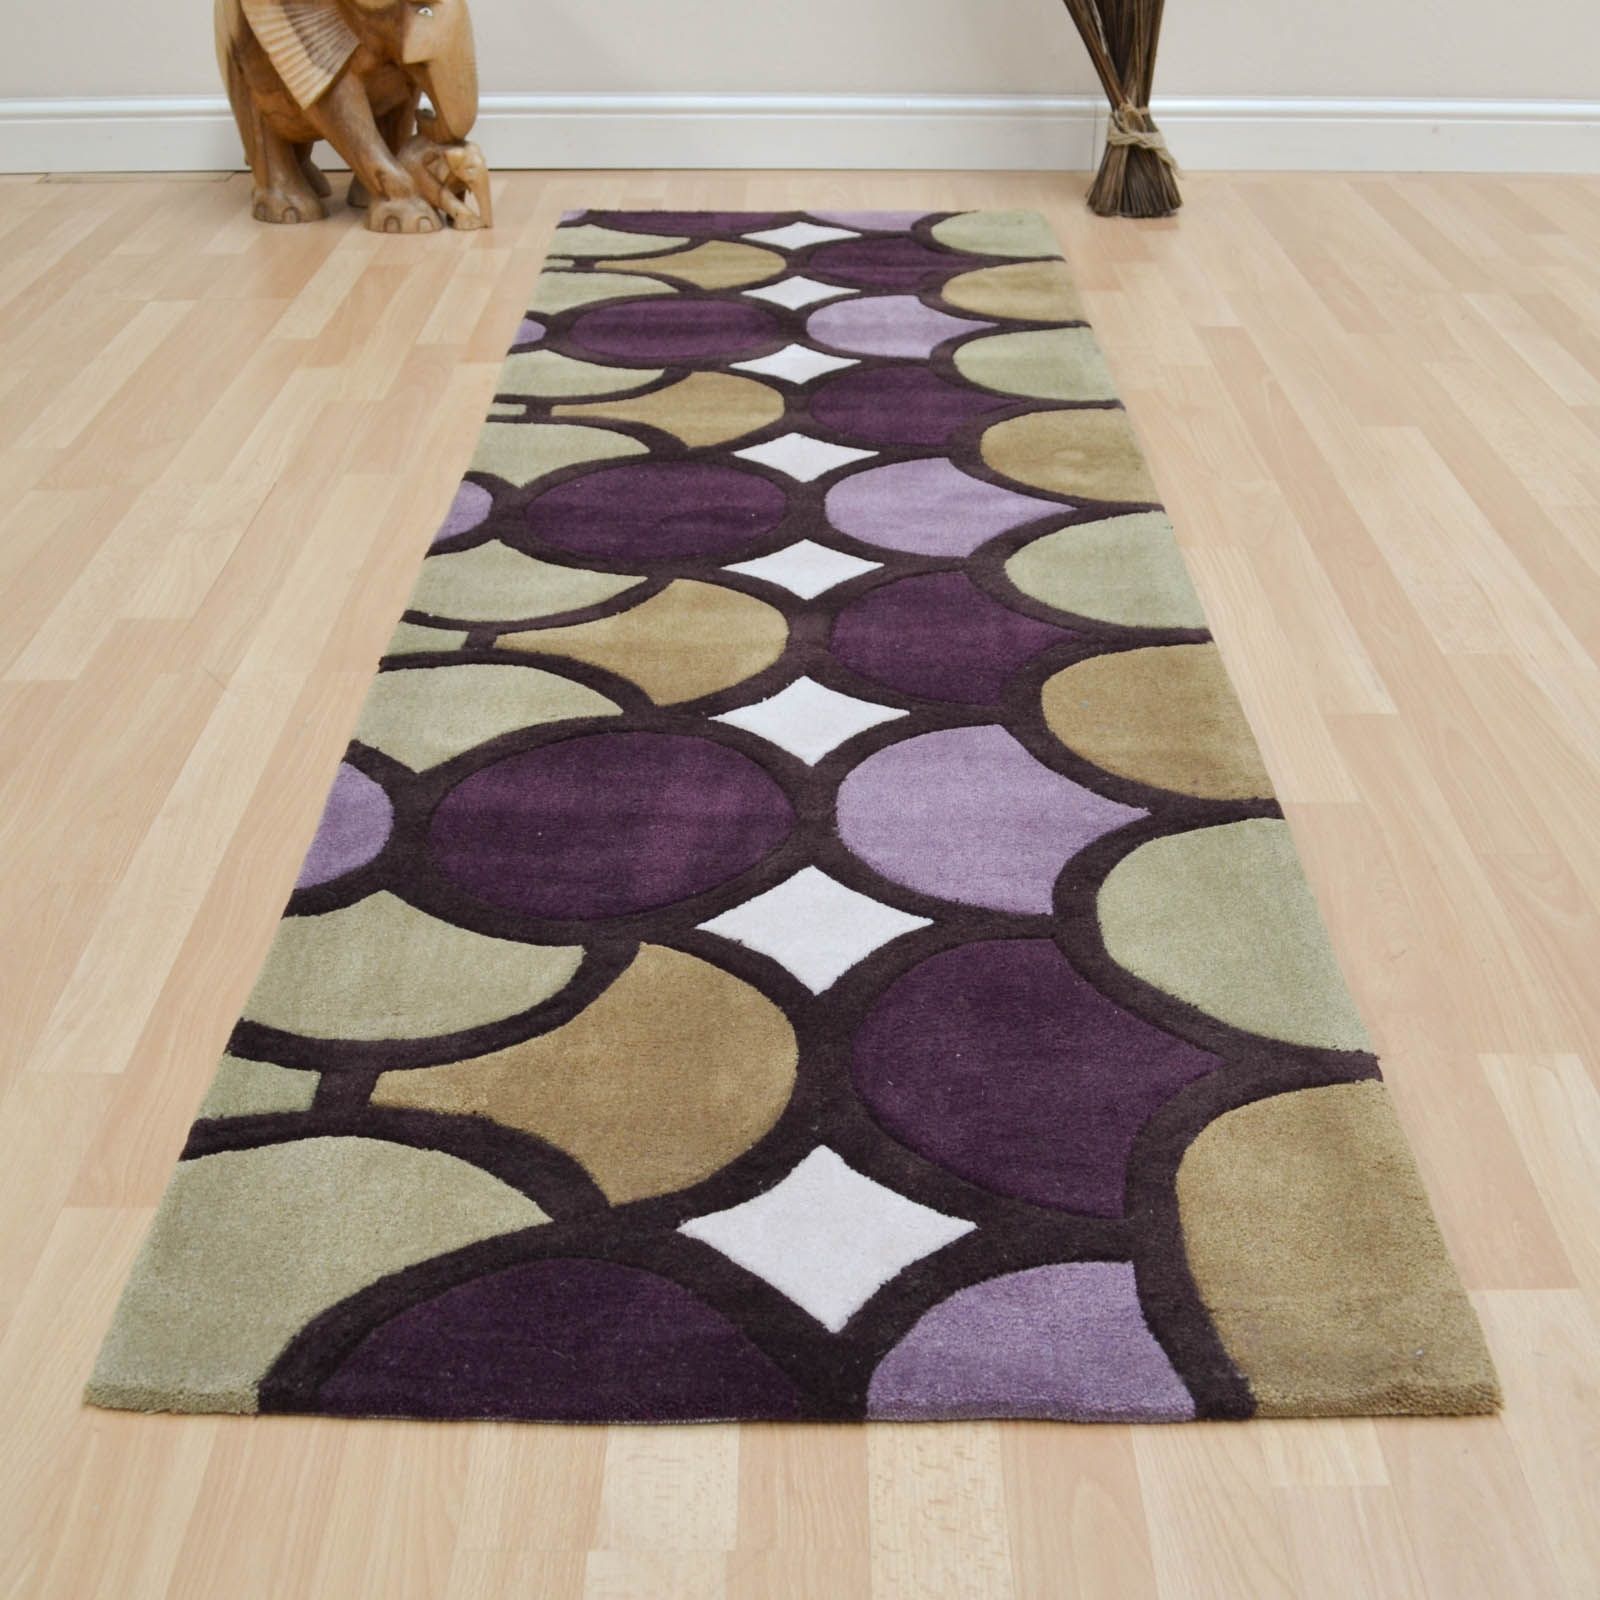 Hall Runner Rugs Uk Roselawnlutheran With Regard To Cheap Runners For Hallways (View 18 of 20)